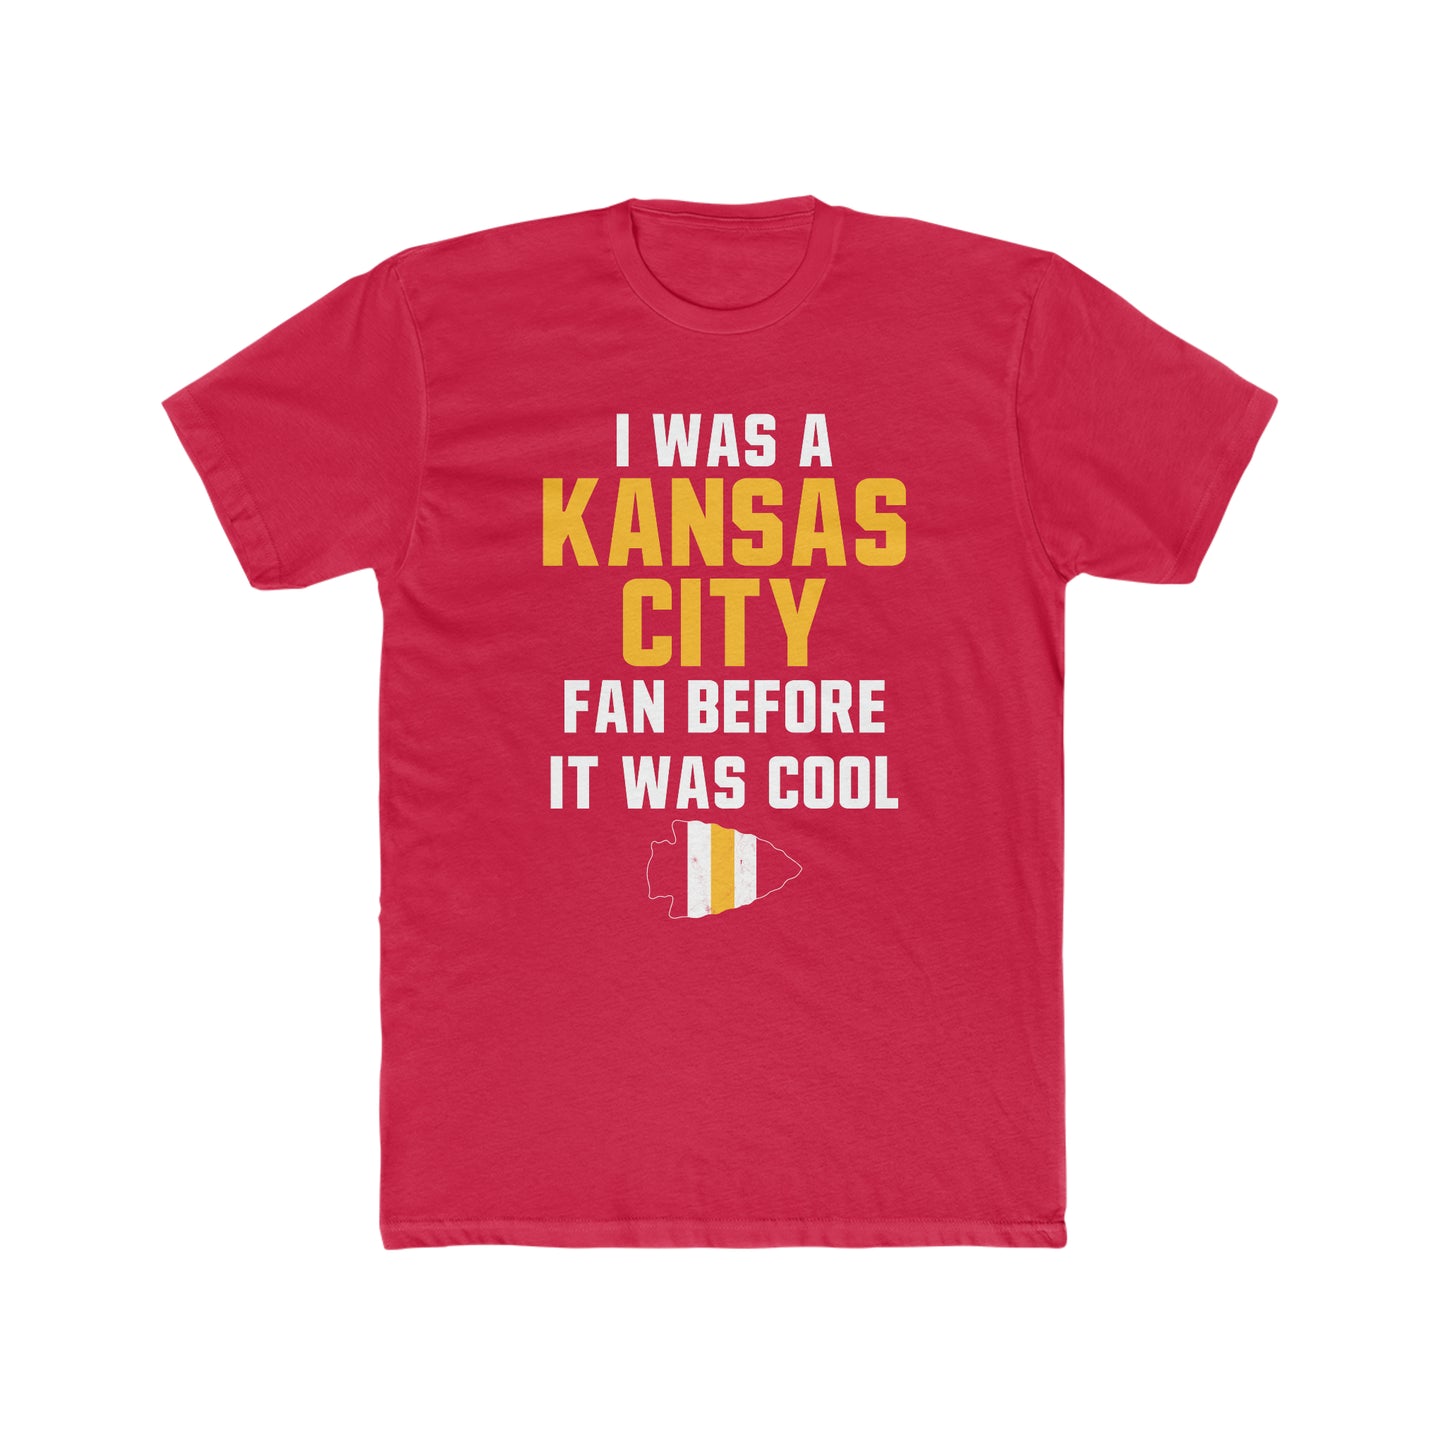 I was a Kansas City Fan before it was cool - UNISEX Cotton Crew Tee